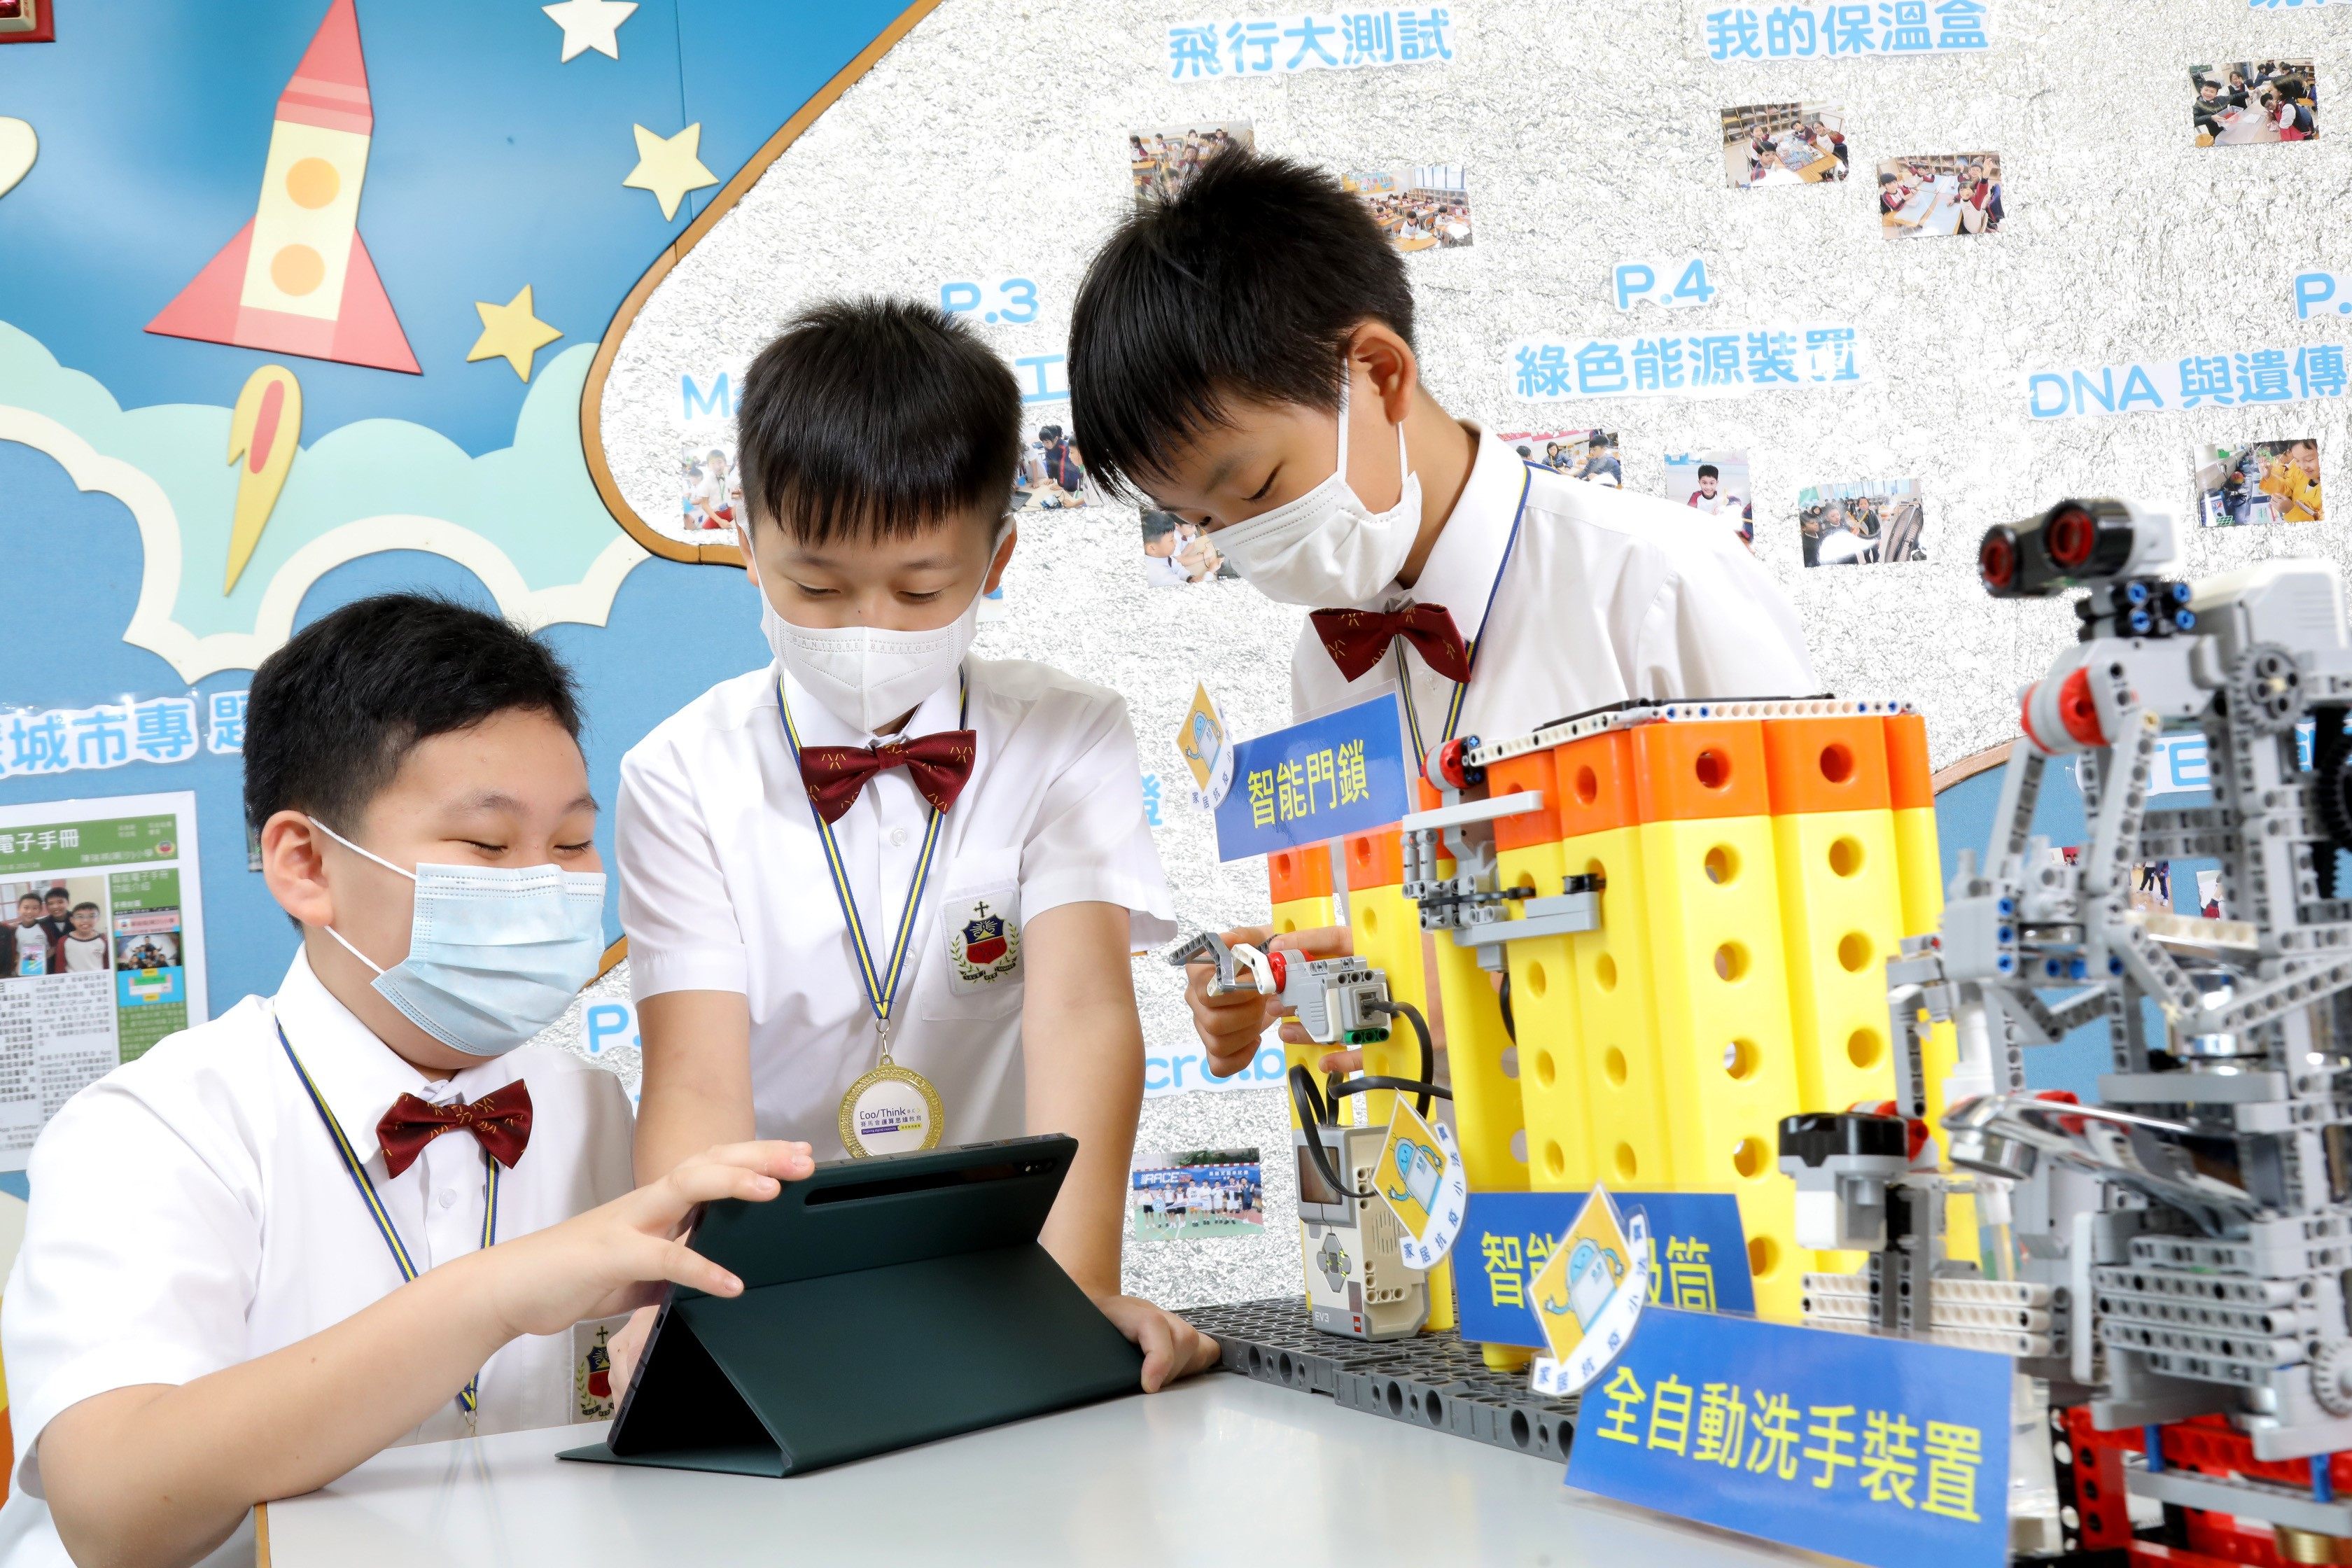 Chan Sui Ki (La Salle) Primary School’s winning team in the CoolThink@JC Competition developed the Smart Home Pandemic Fighter app to remind family members to conduct disinfectant procedures. Photo: The Hong Kong Jockey Club